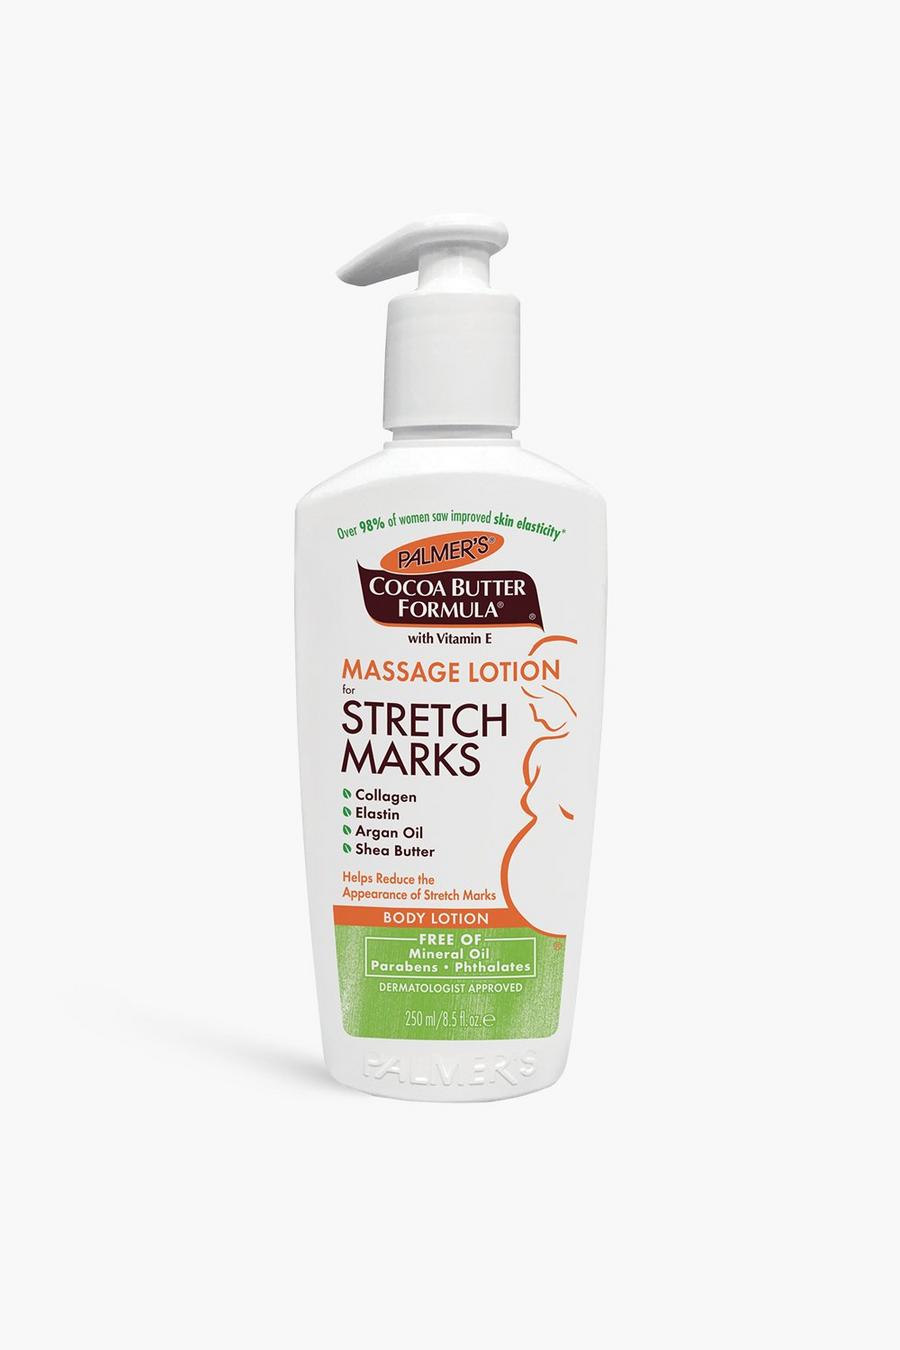 Clear clair Palmer’s Cocoa Butter Formula Stretch mark Lotion 250ml